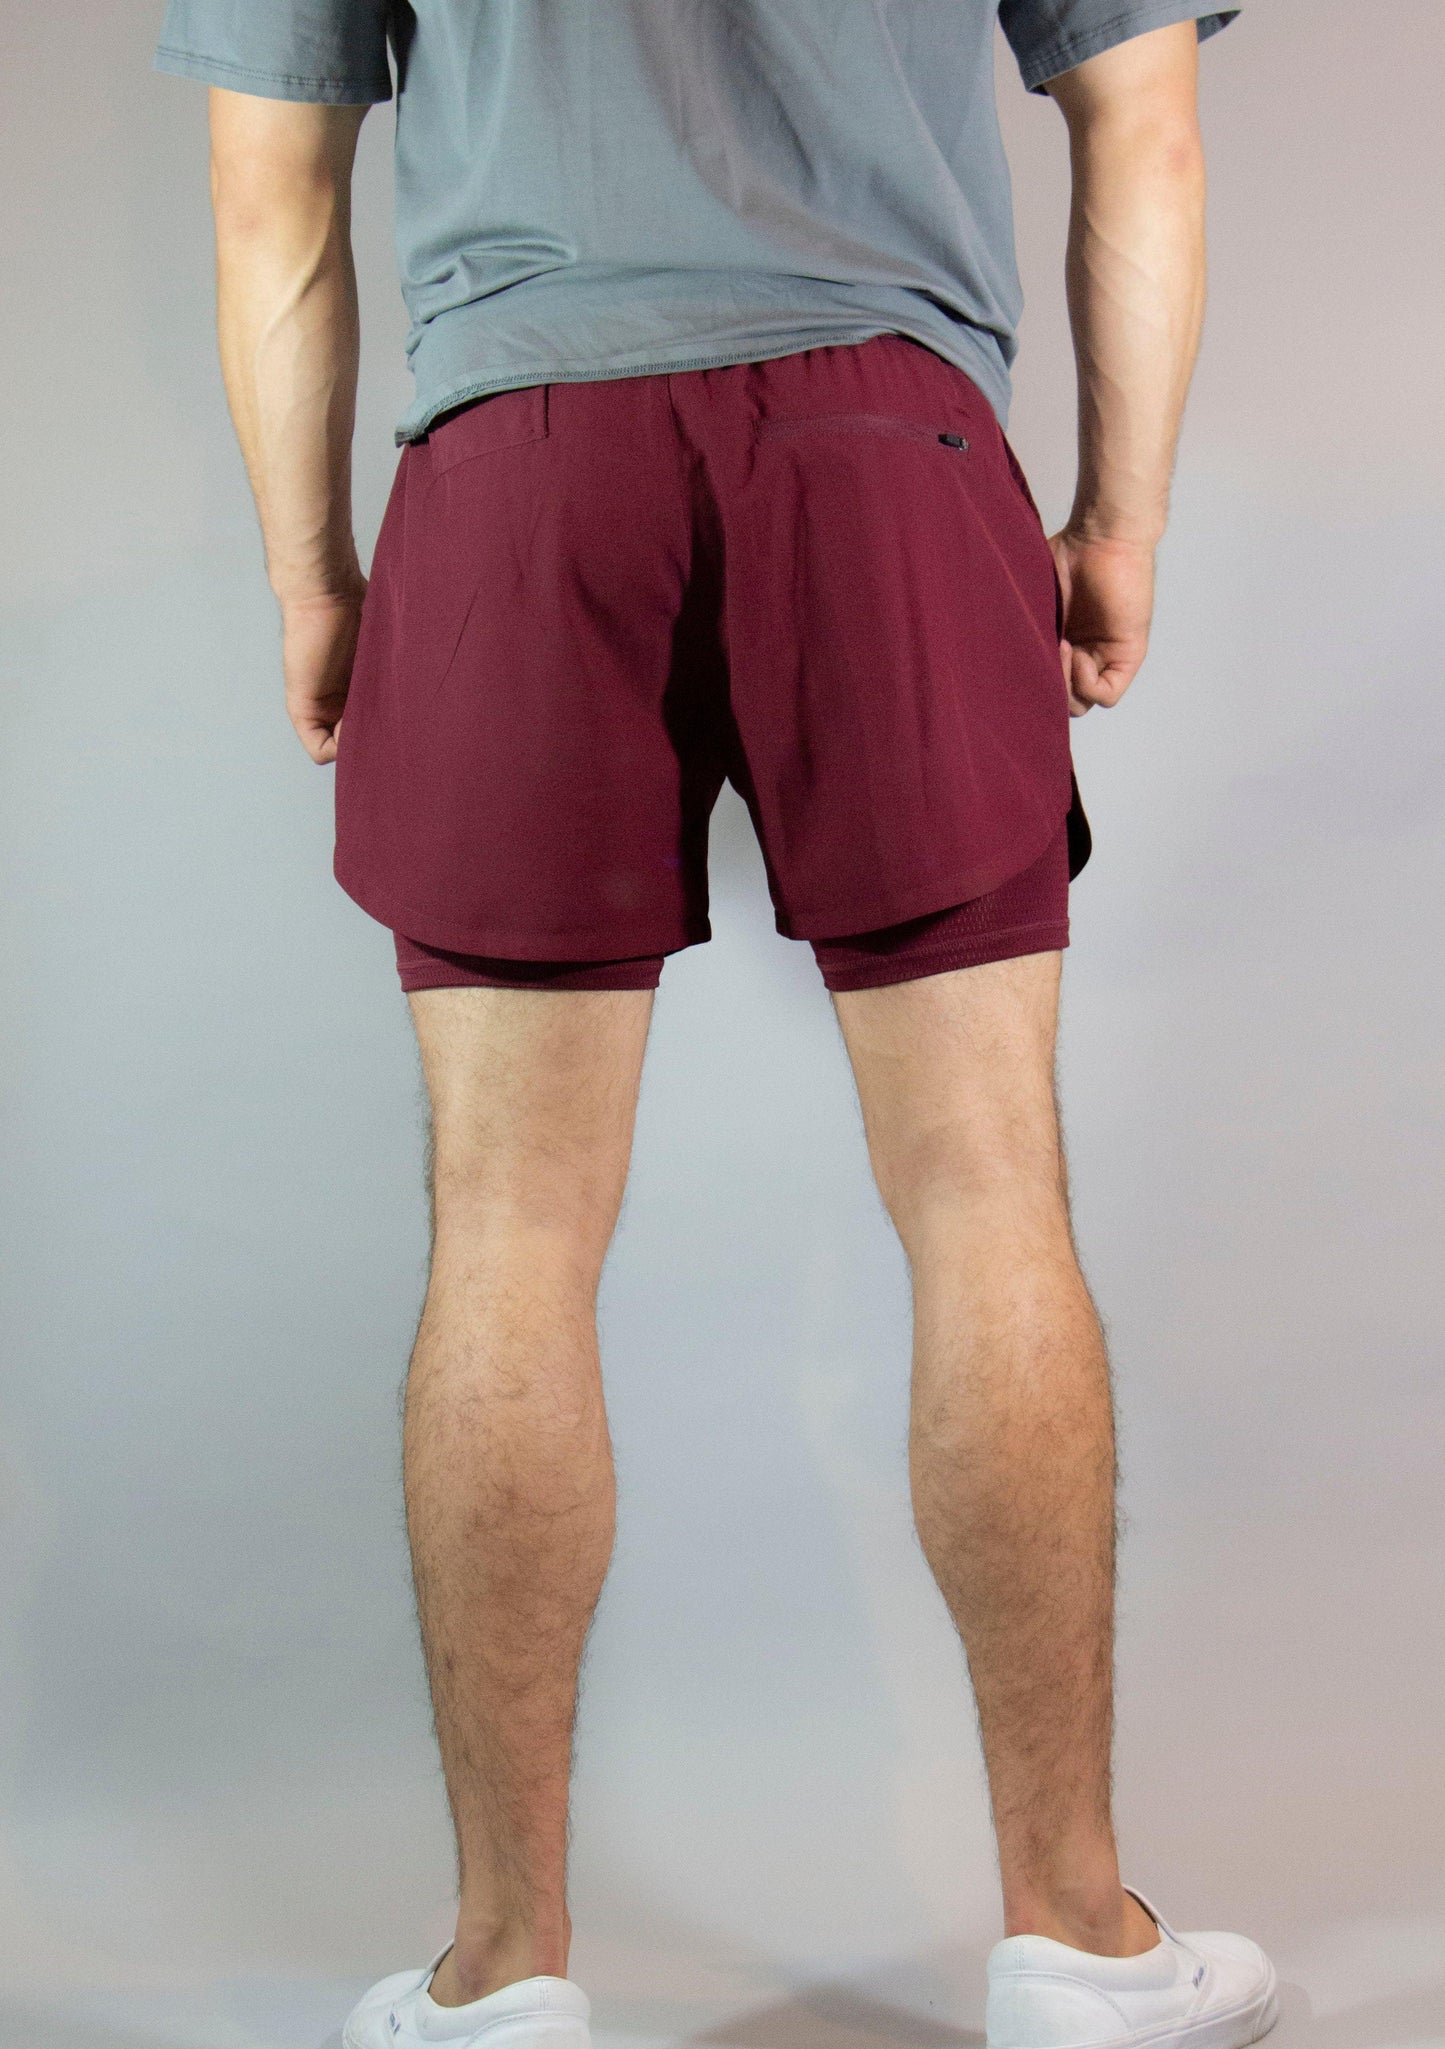 Two in one Athletic Shorts 5" Burgundy - builtwear